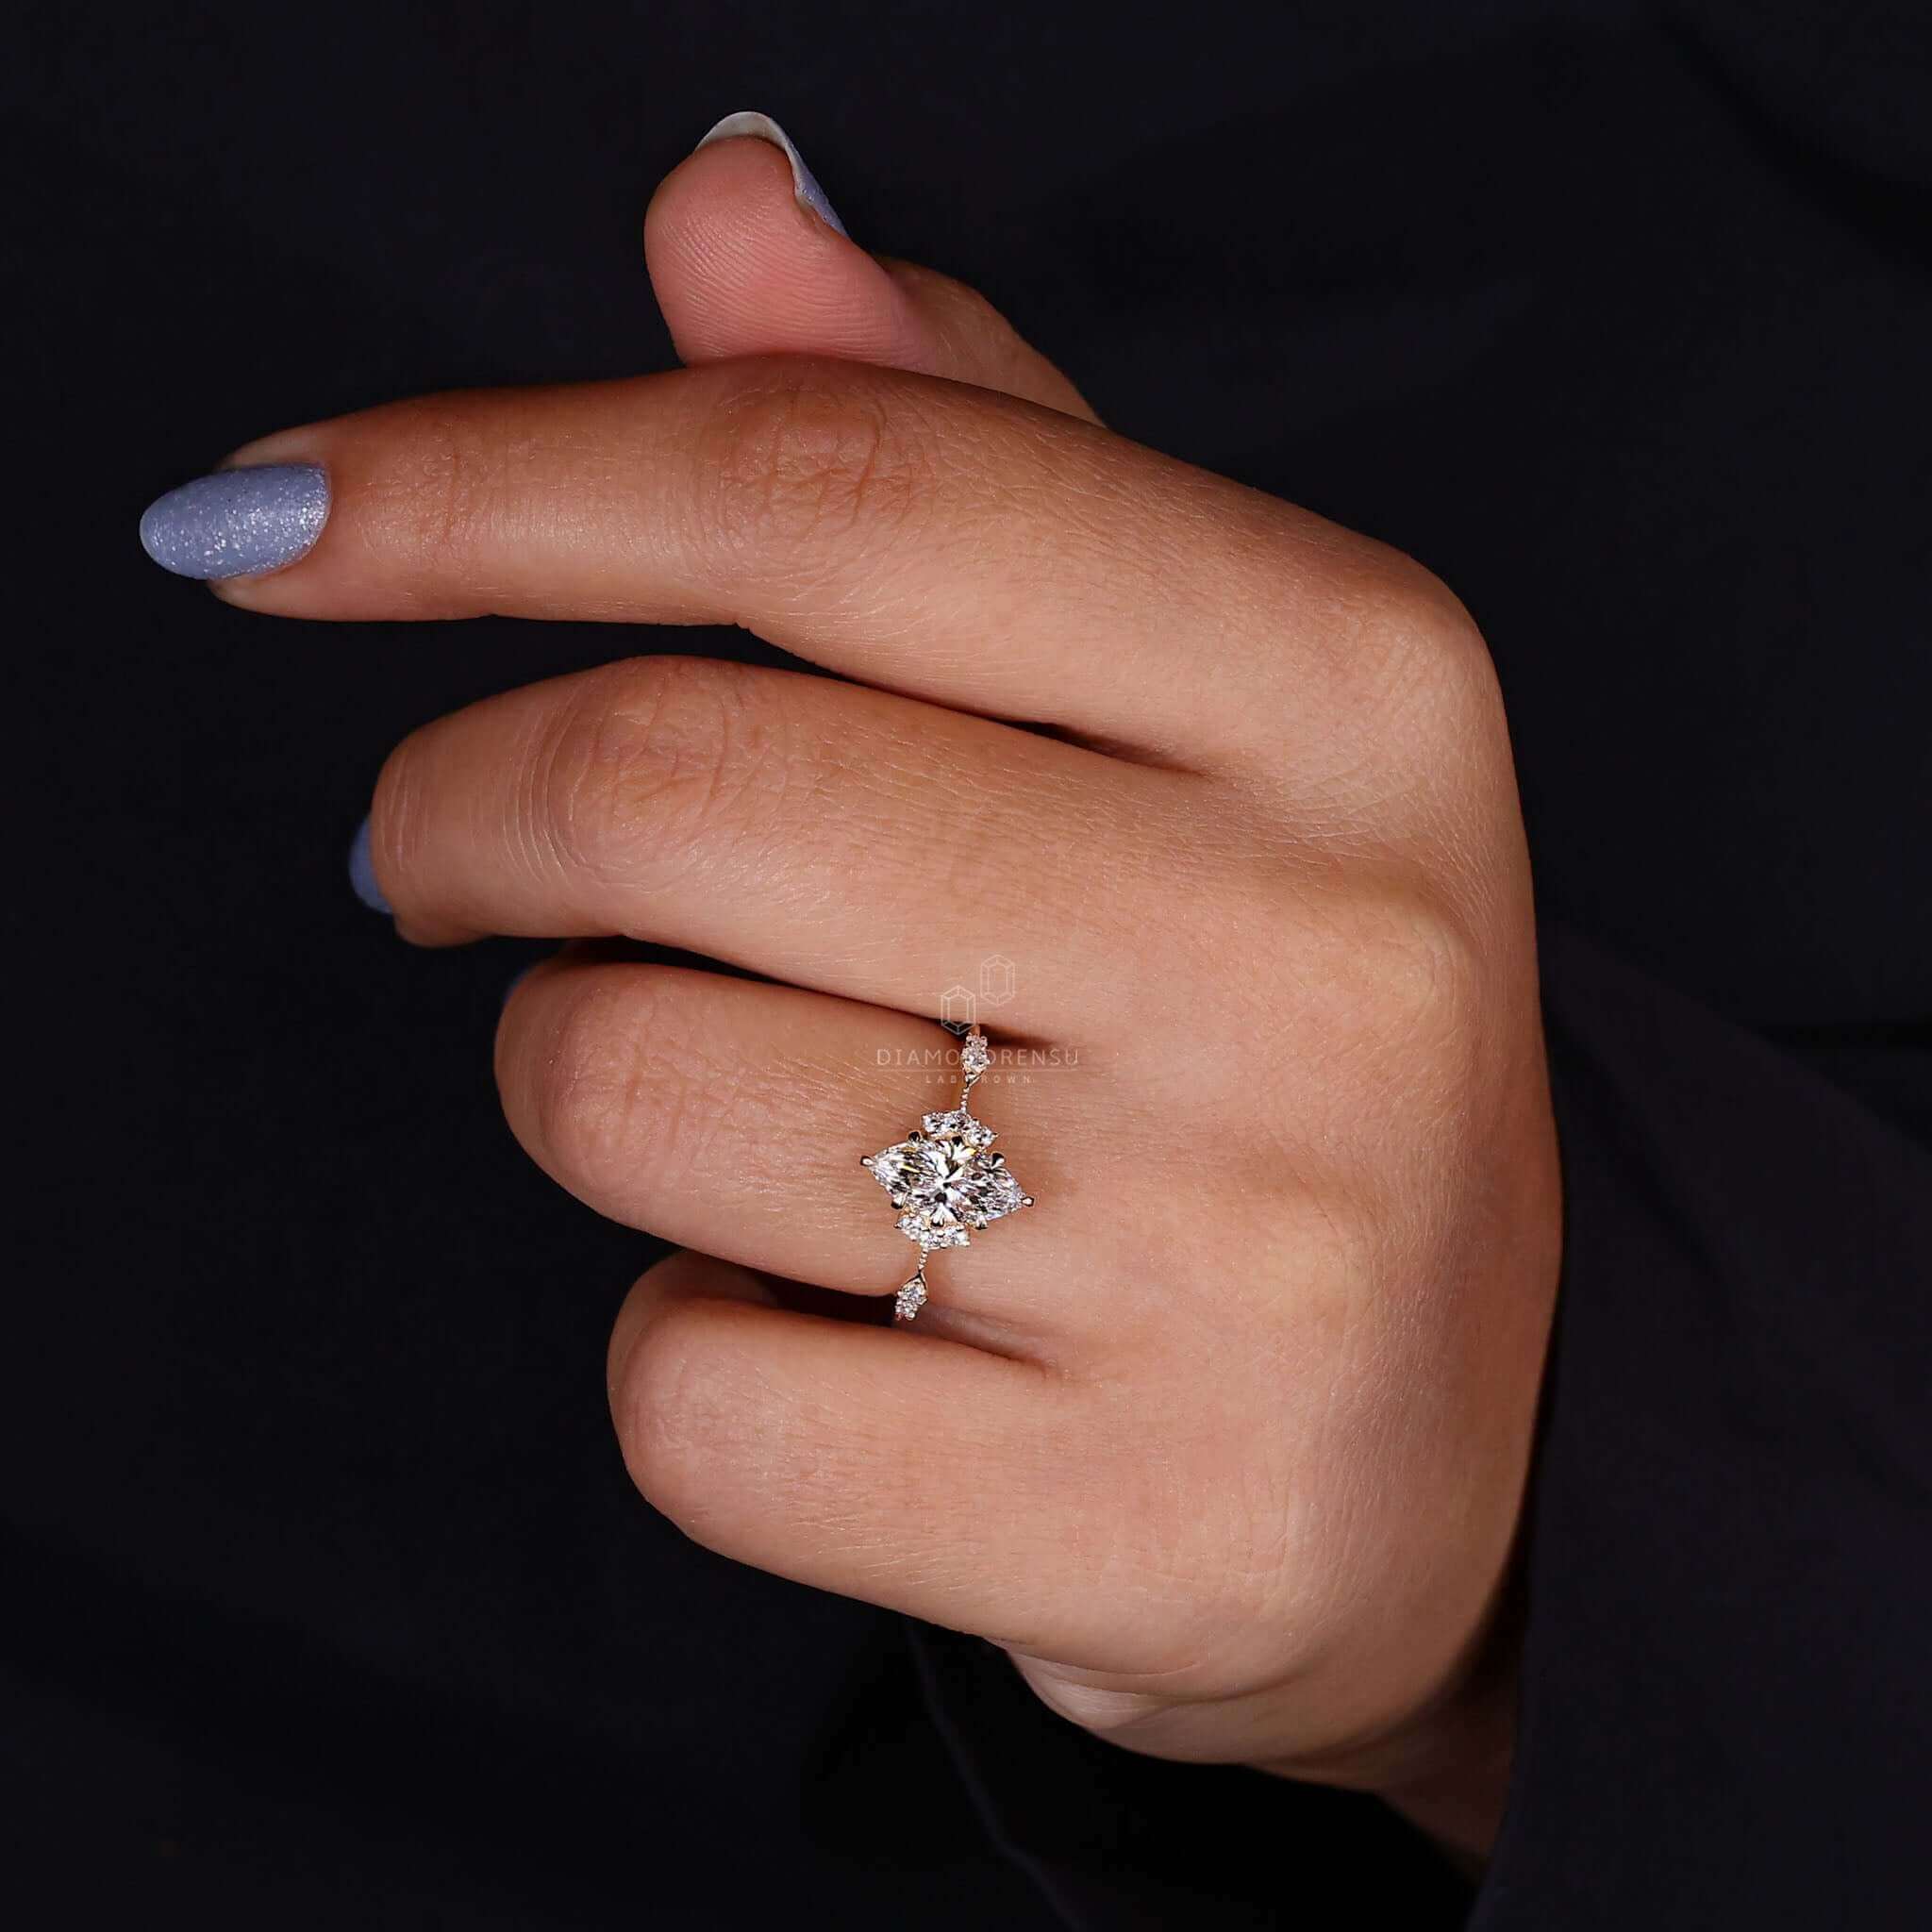 Woman's hand showing off a marquise cut engagement ring with a lab-grown diamond, featuring sidestones and claw prongs.